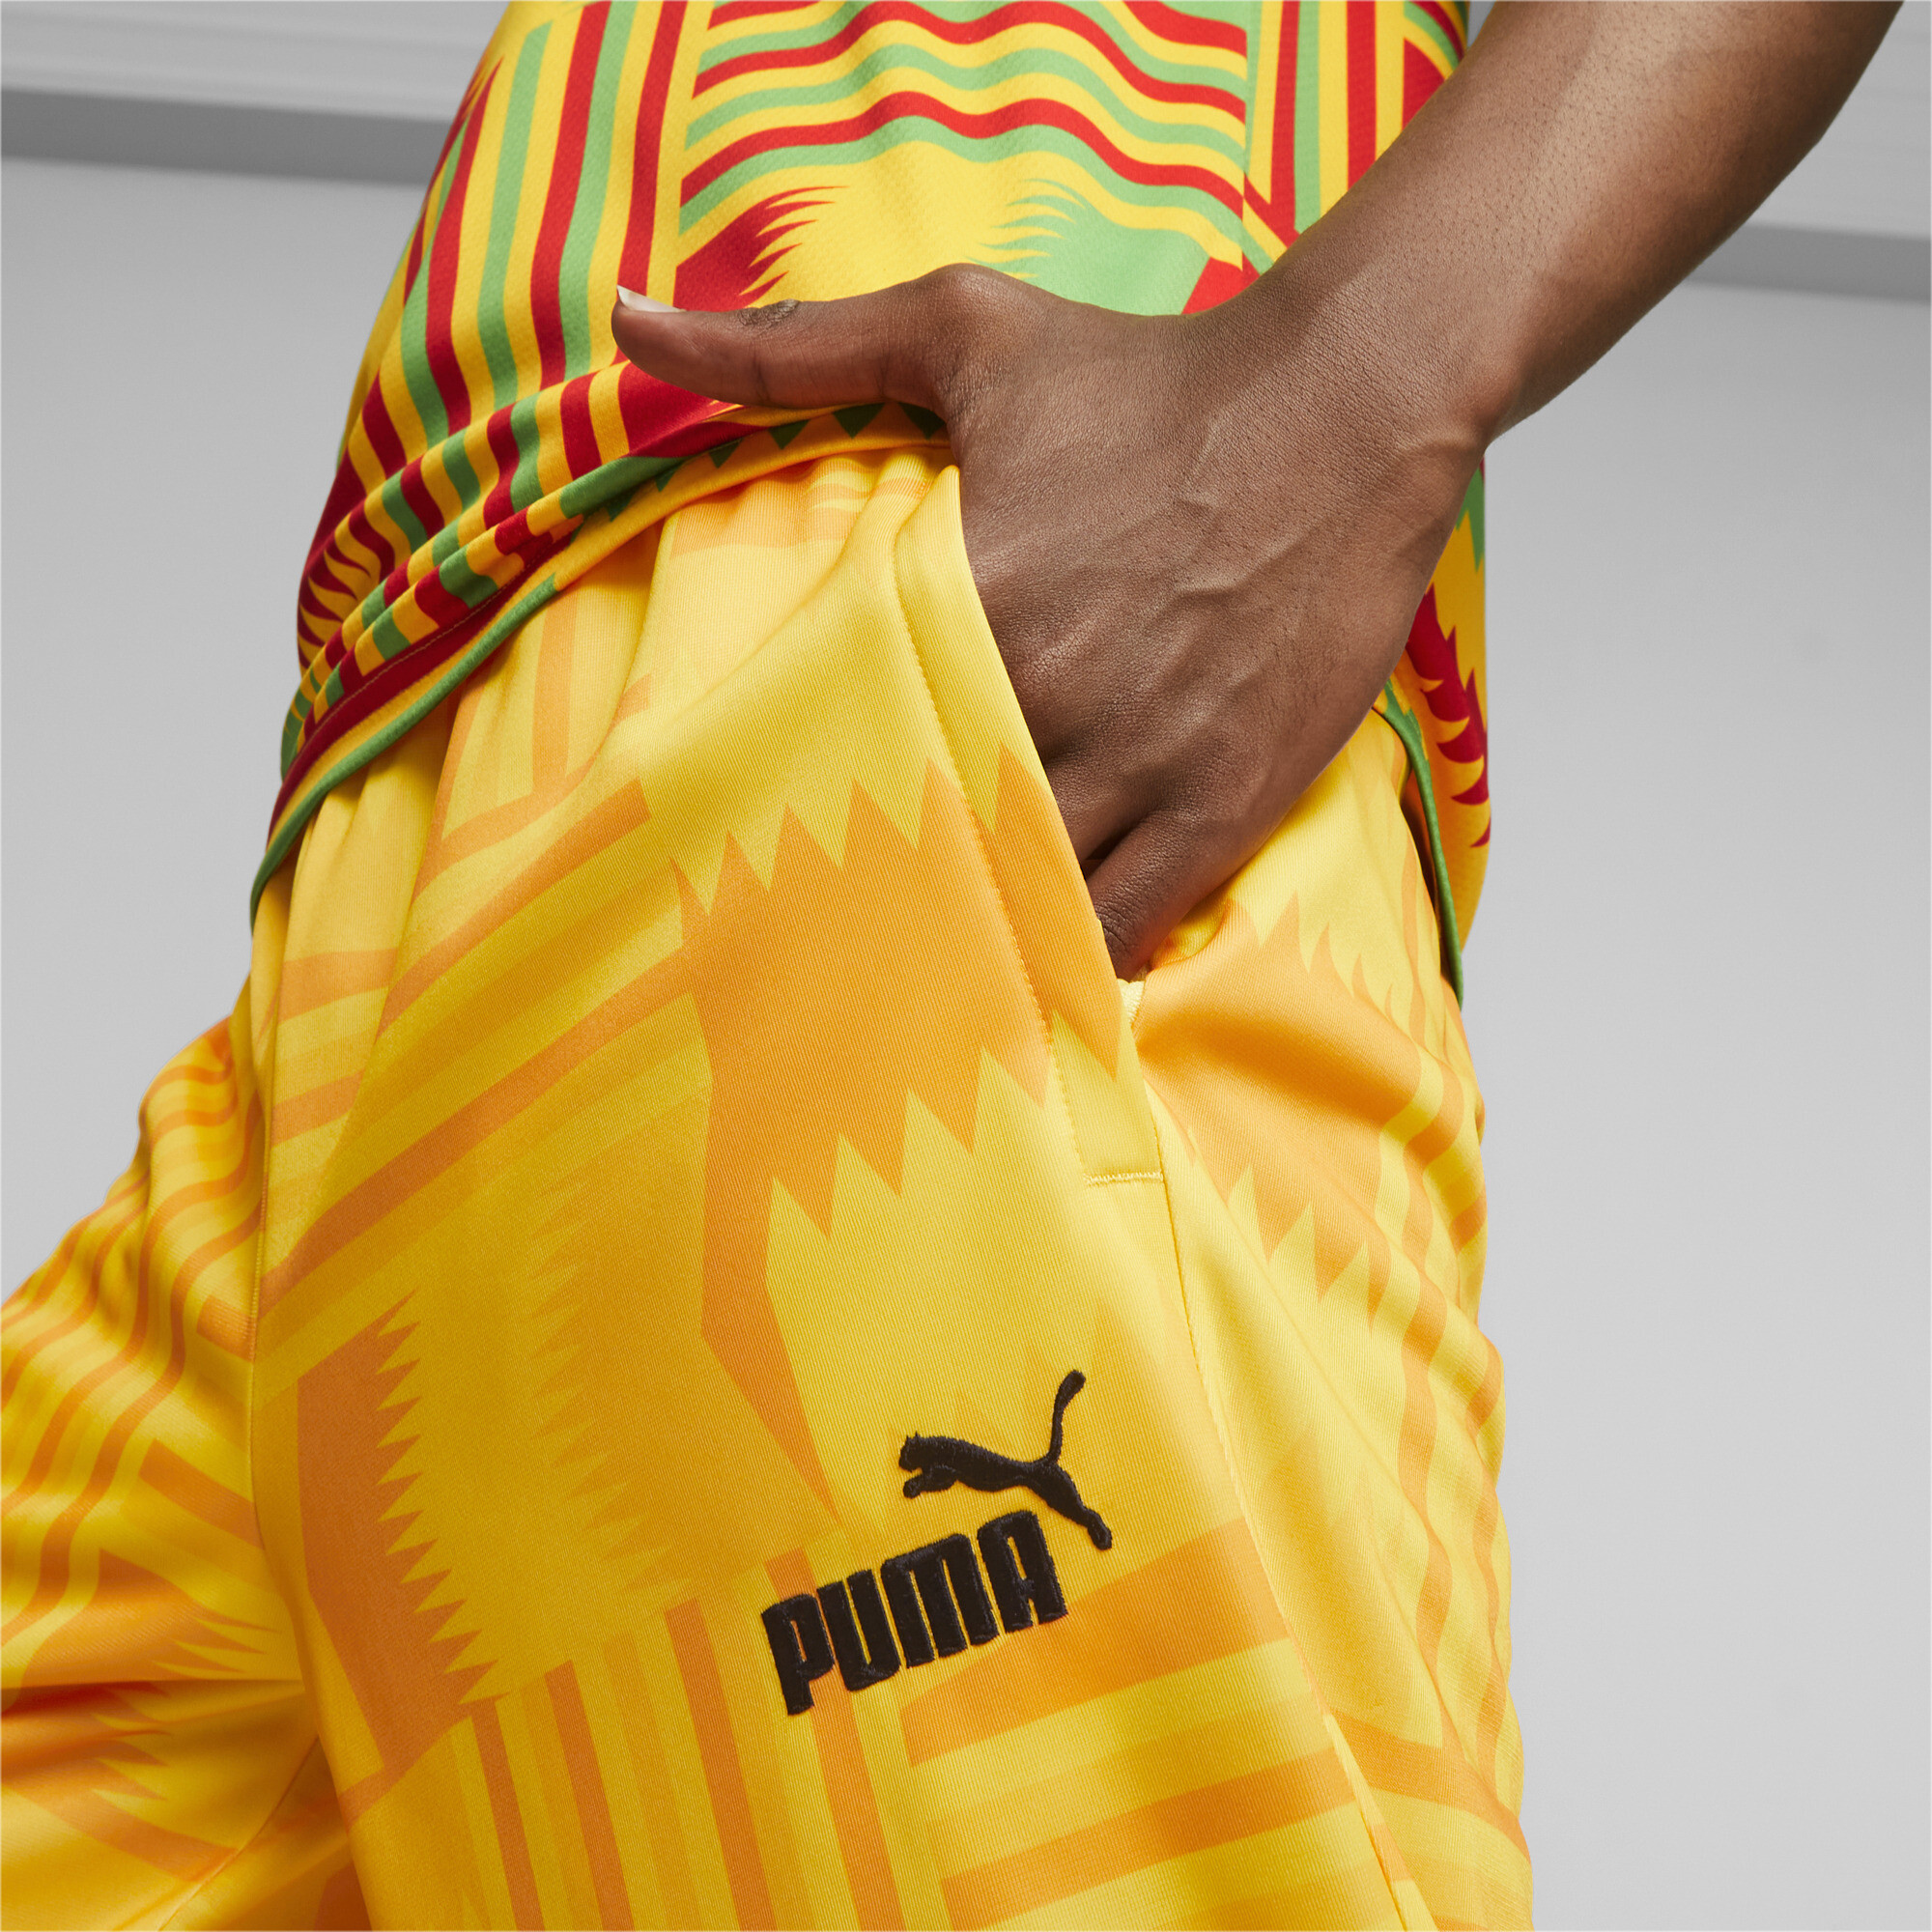 Men's PUMA Ghana FtblCulture Track Pants In Yellow, Size XL